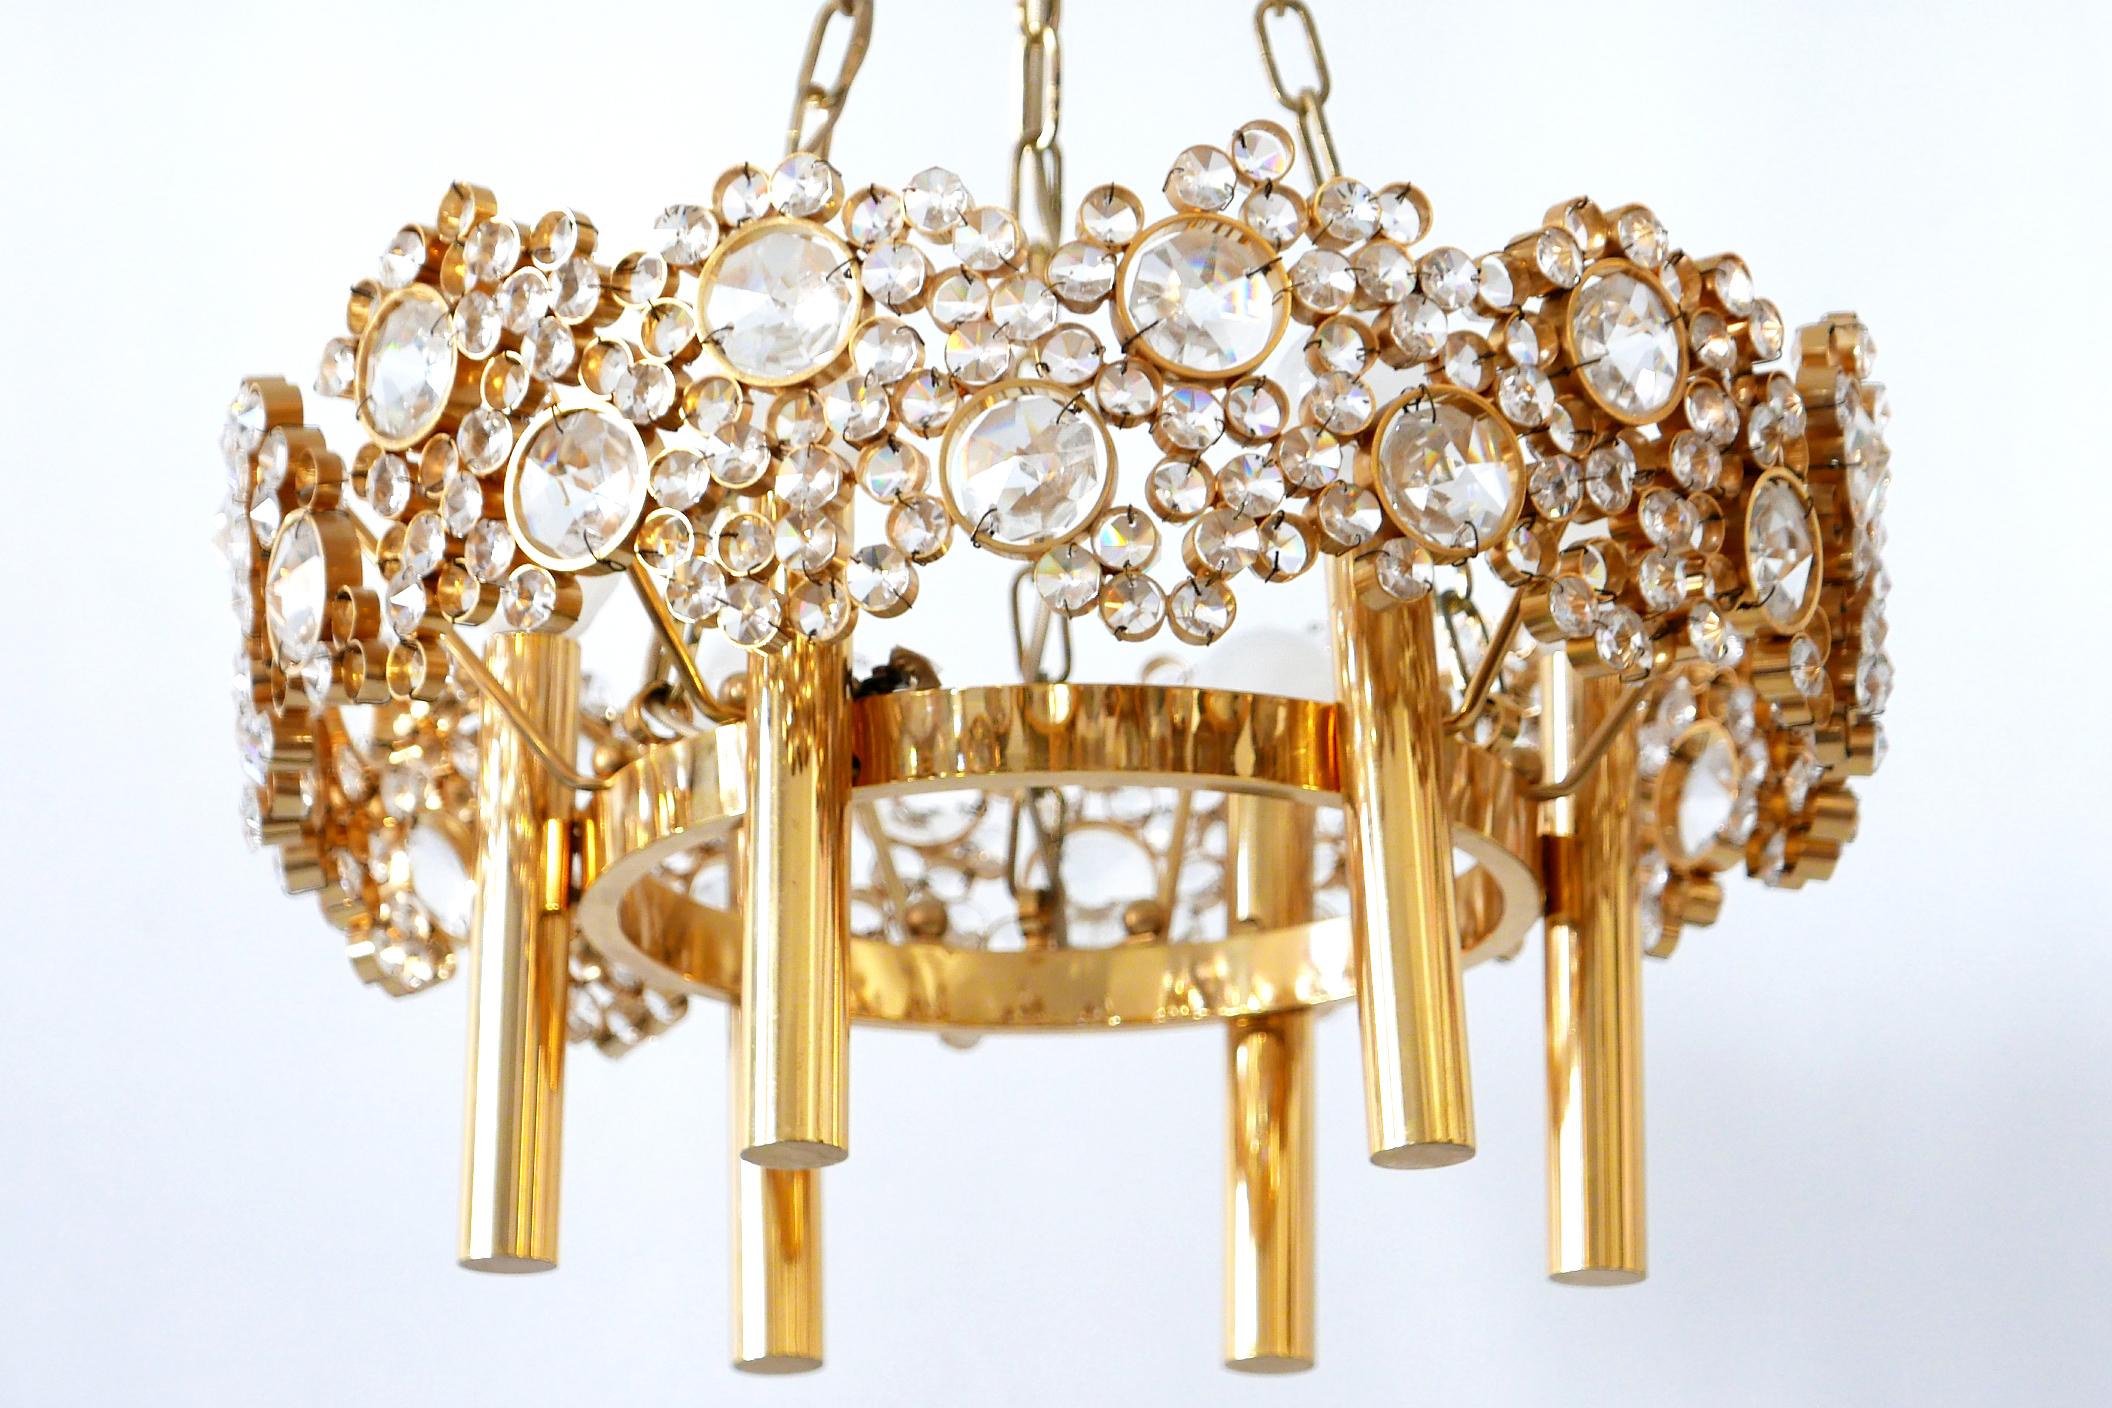 Gilt Brass Facet Cut Crystal Glass Chandelier 'Jewel' by Palwa, 1970s, Germany For Sale 1